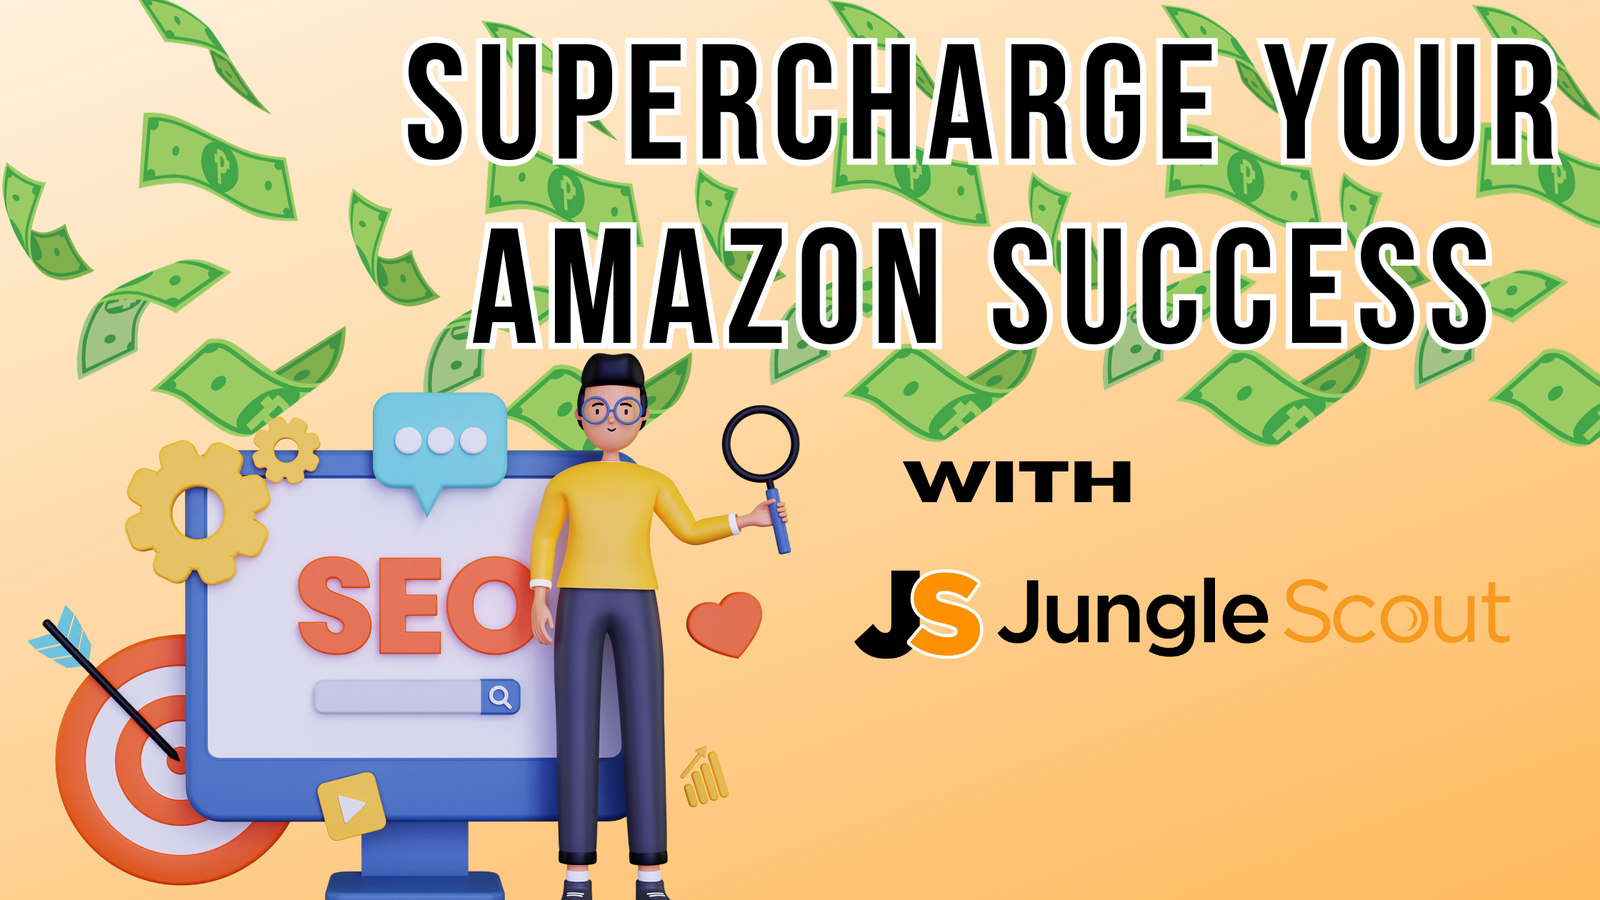 Supercharge Your Amazon Success: Master Amazon SEO with Jungle Scout for Explosive Growth